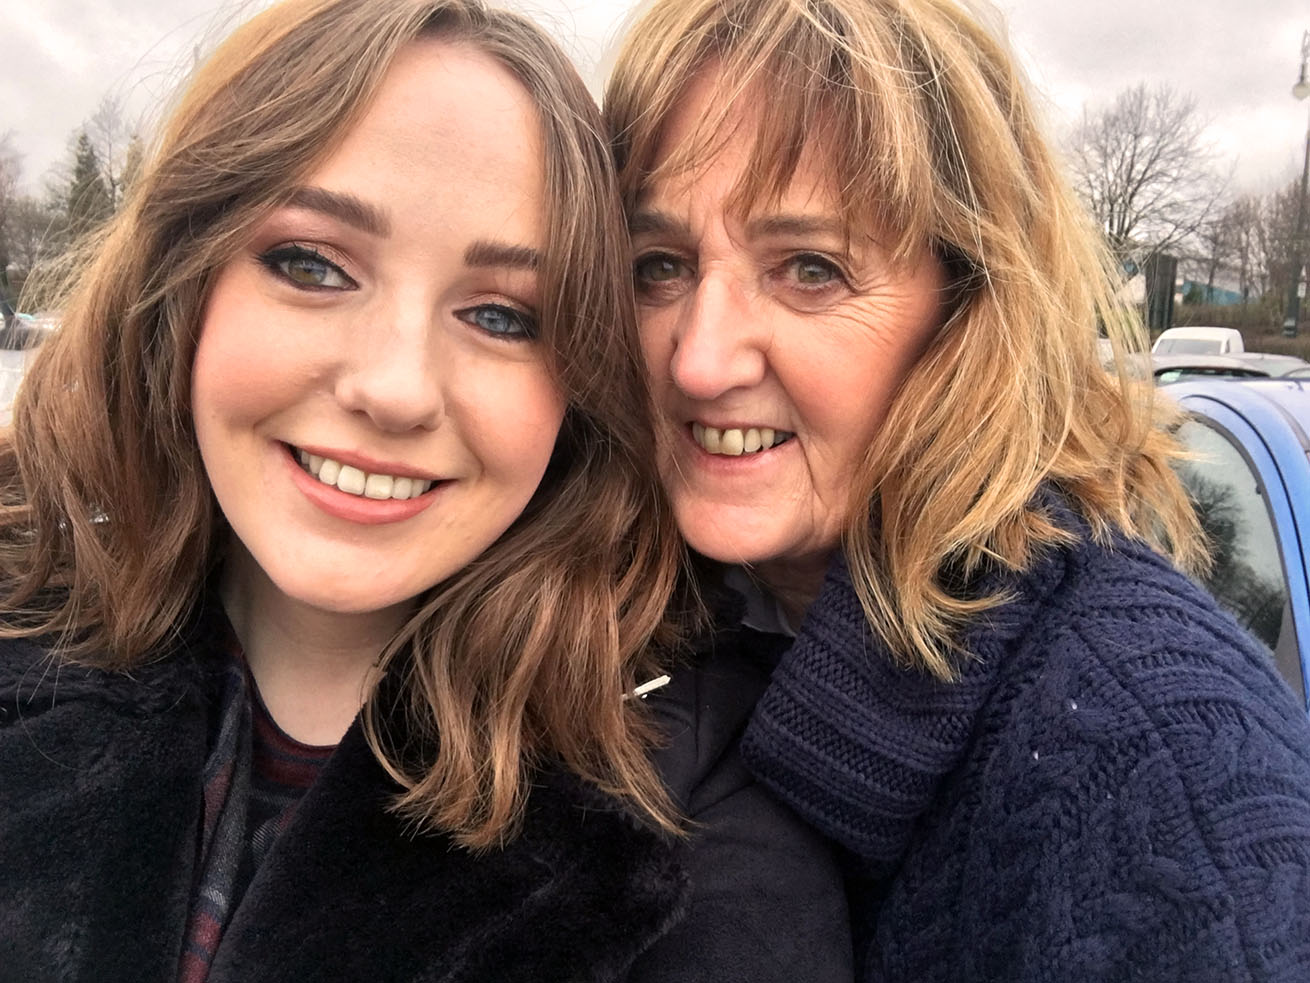 Mother's Day beauty at Selfridges, Liverpool blogger mother daughter selfie